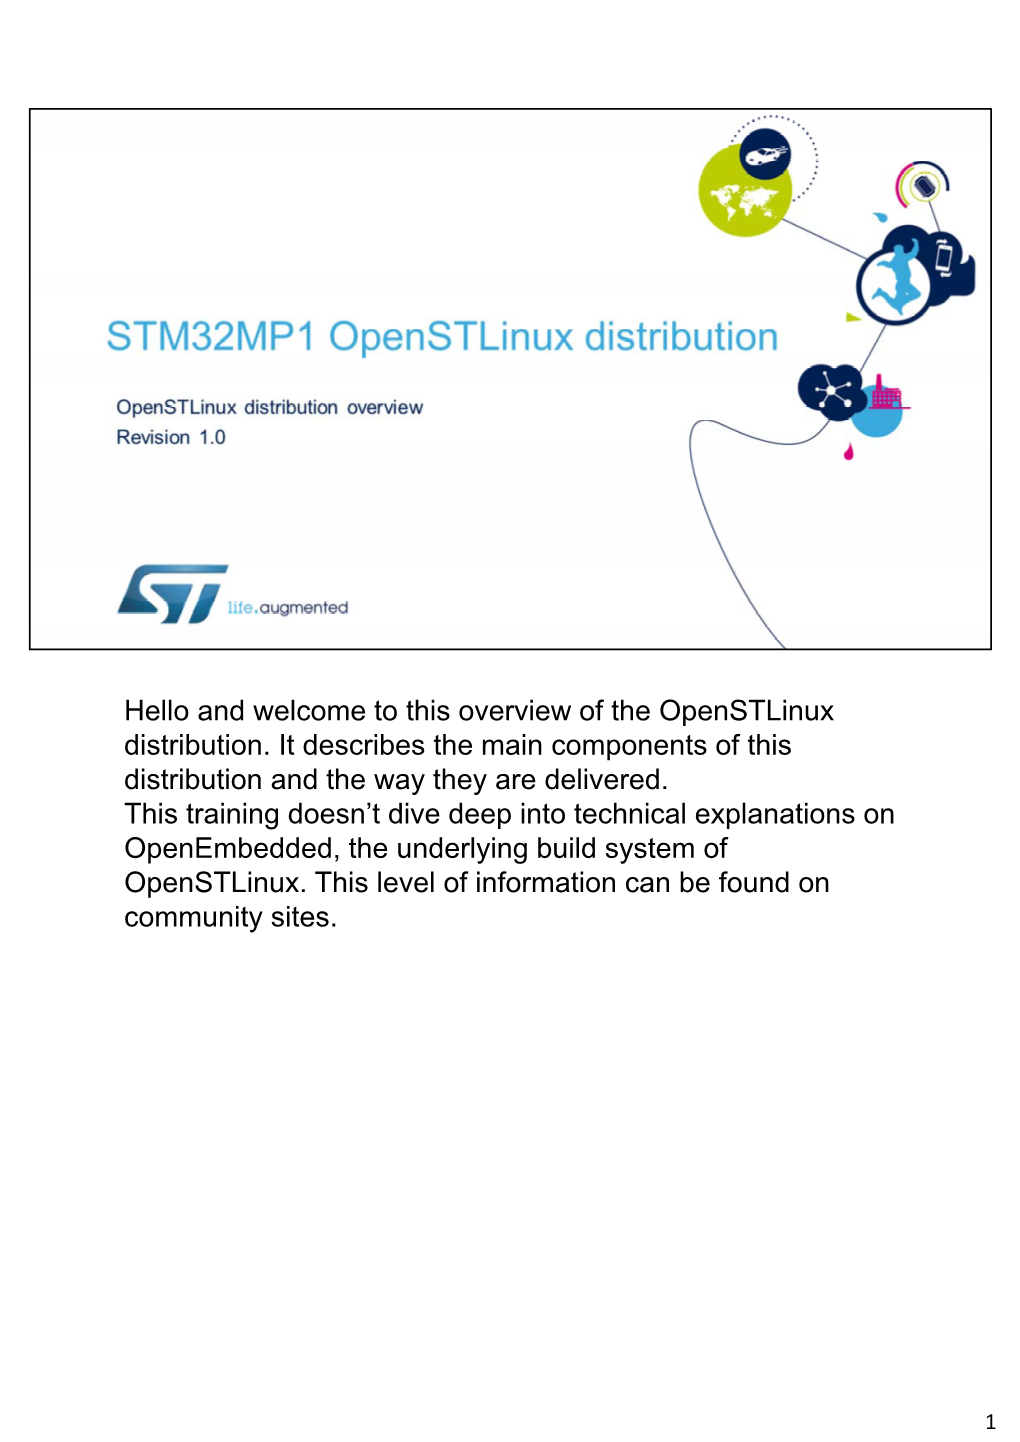 Hello and Welcome to This Overview of the Openstlinux Distribution